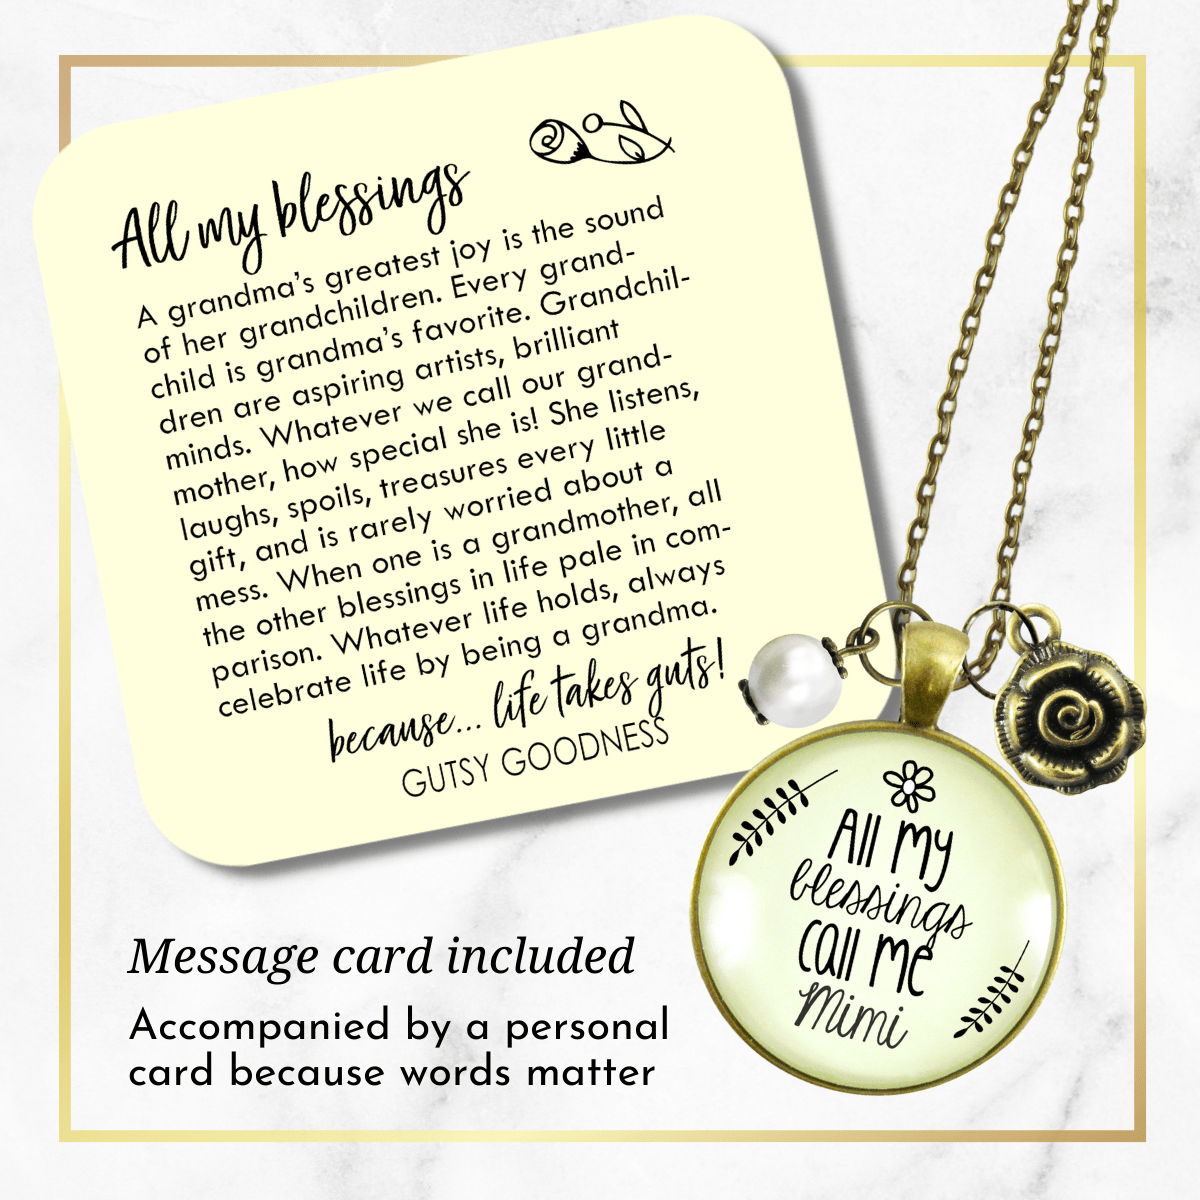 Gutsy Goodness Mimi Necklace All My Blessings Gift Quote Womens Grandma Jewelry - Gutsy Goodness Handmade Jewelry;Mimi Necklace All My Blessings Gift Quote Womens Grandma Jewelry - Gutsy Goodness Handmade Jewelry Gifts